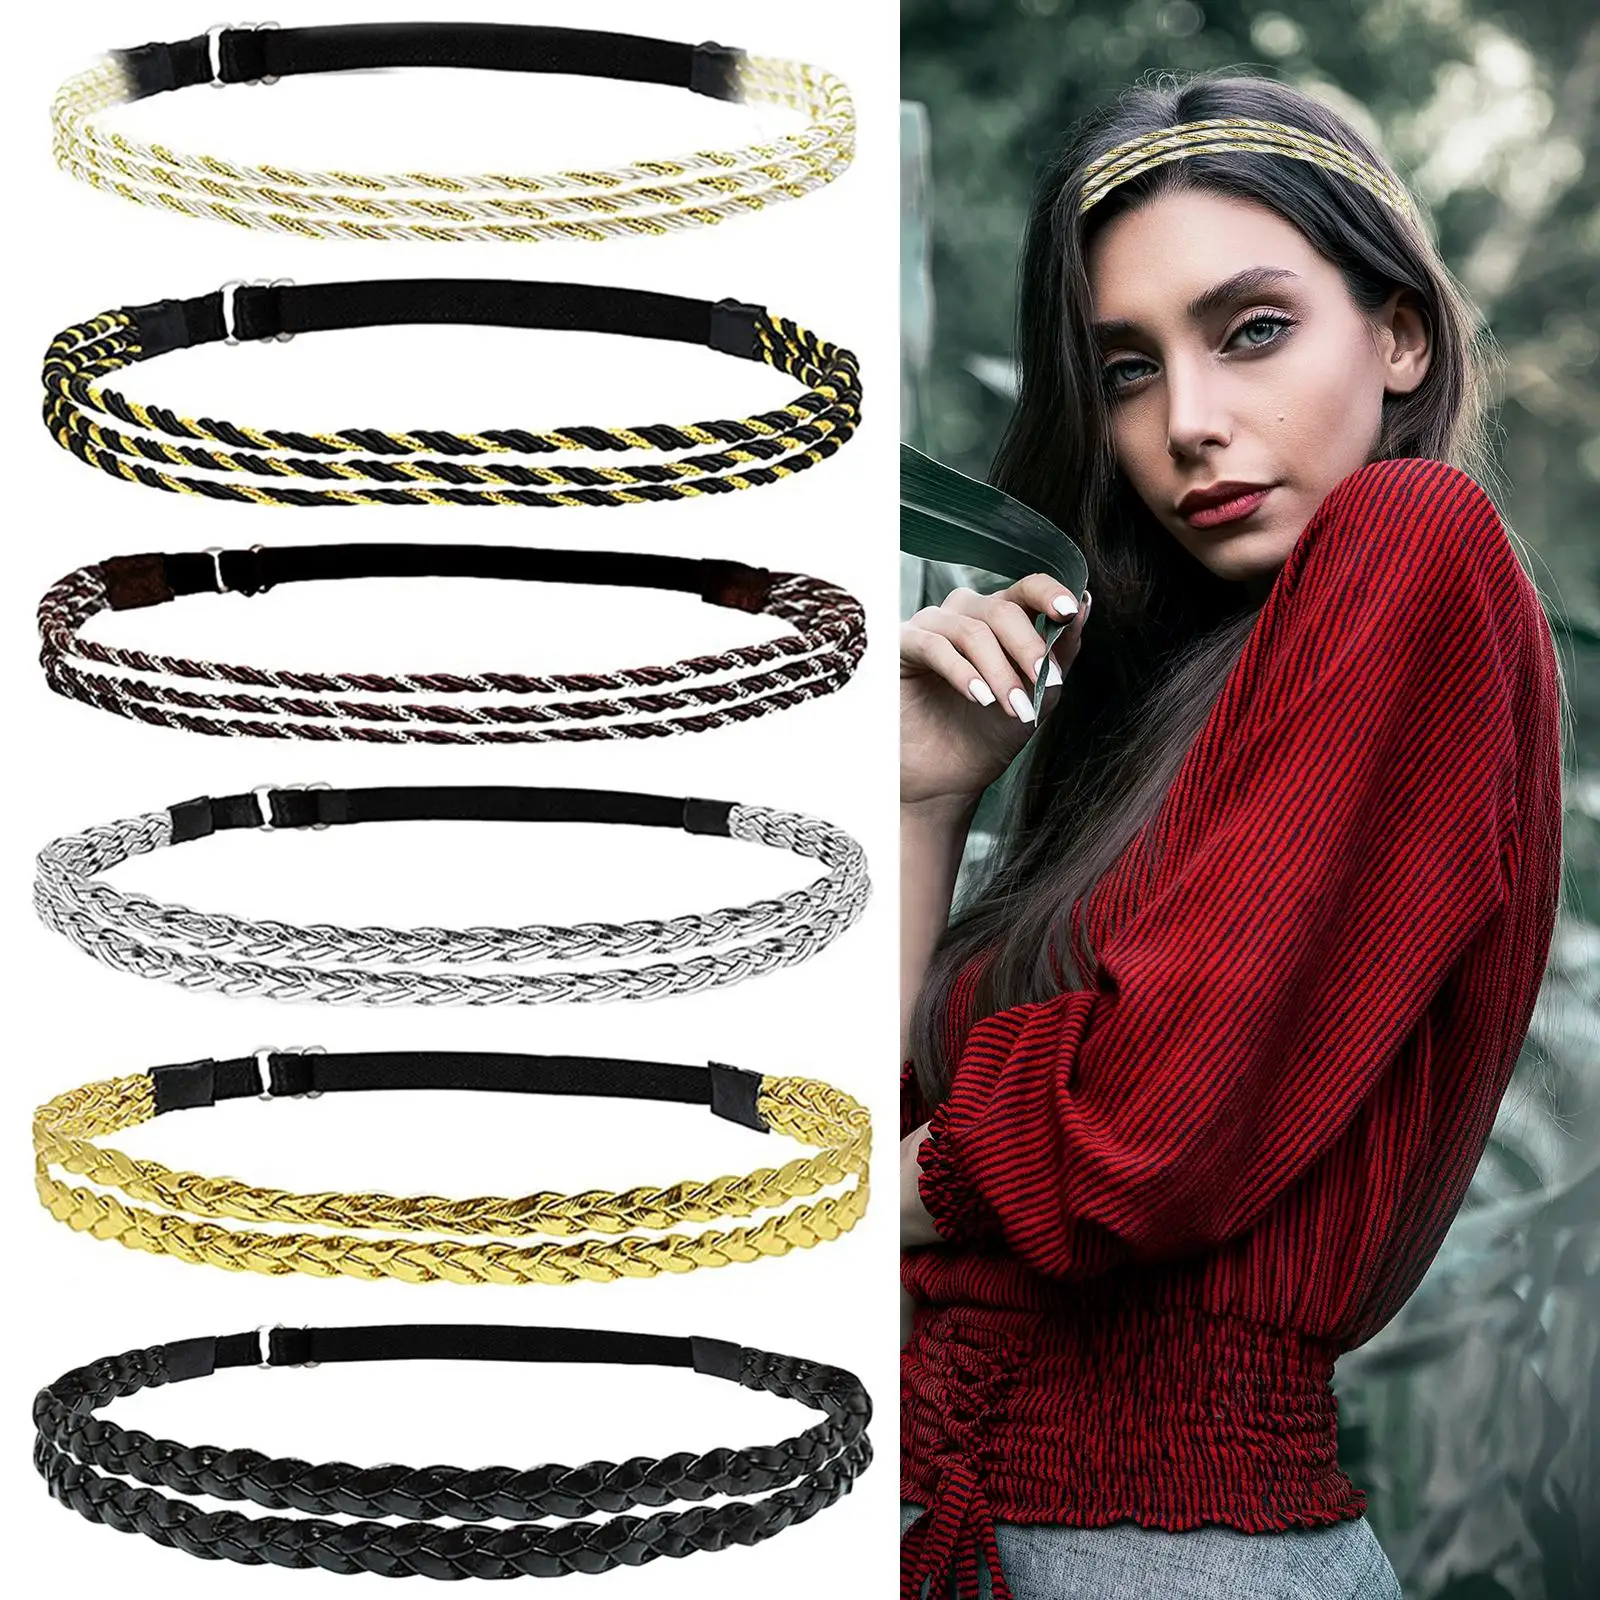 6 Pieces Braided Headbands with Double Braided and Triple Strand Bohemian Style Plaited No Slip Hair Band for Girl Women Running